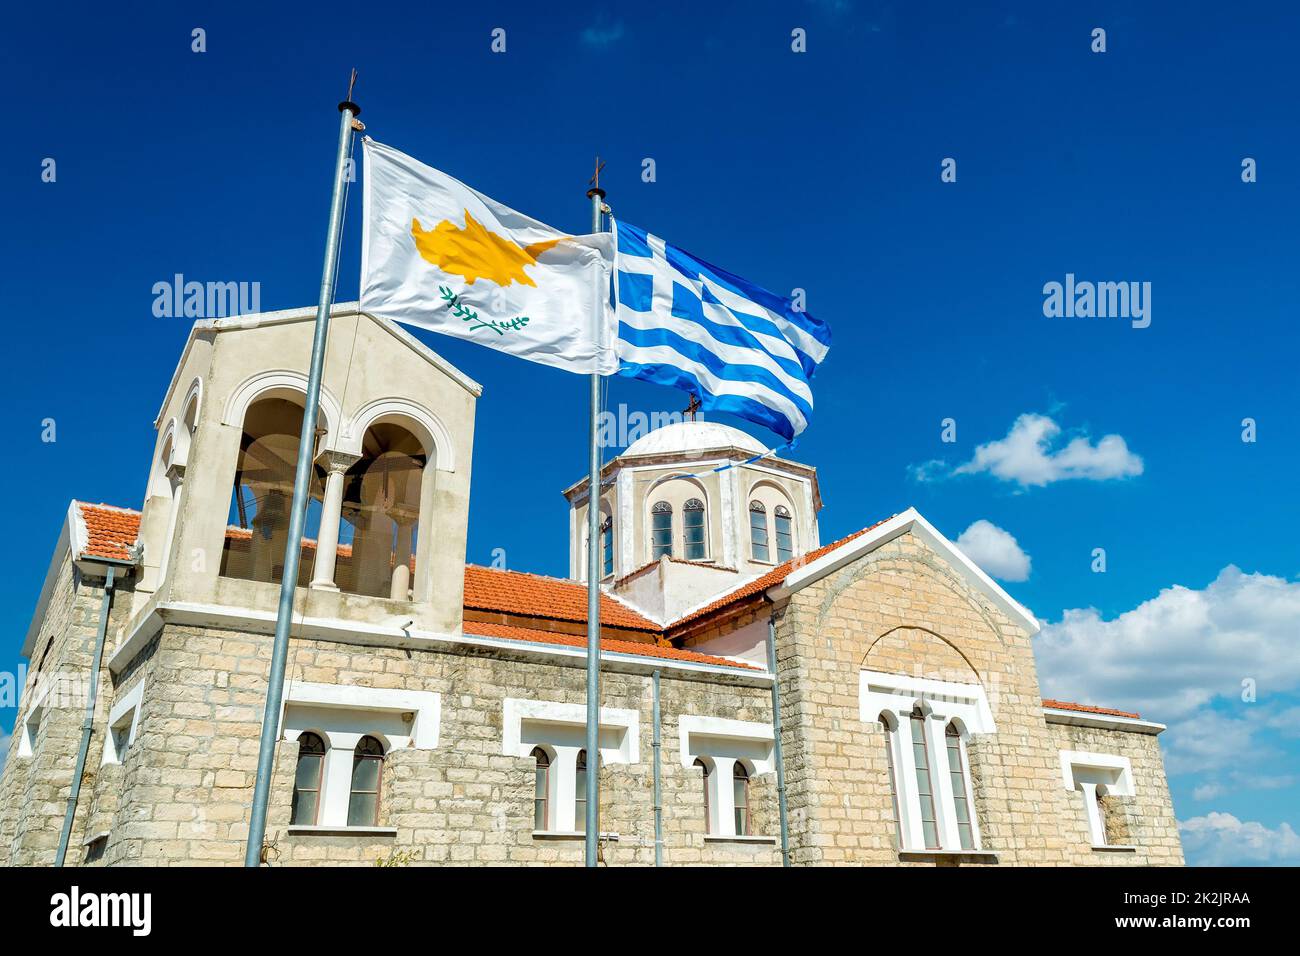 Waving flag of Cyprus and Greece with Orthodox church on the background. Stock Photo